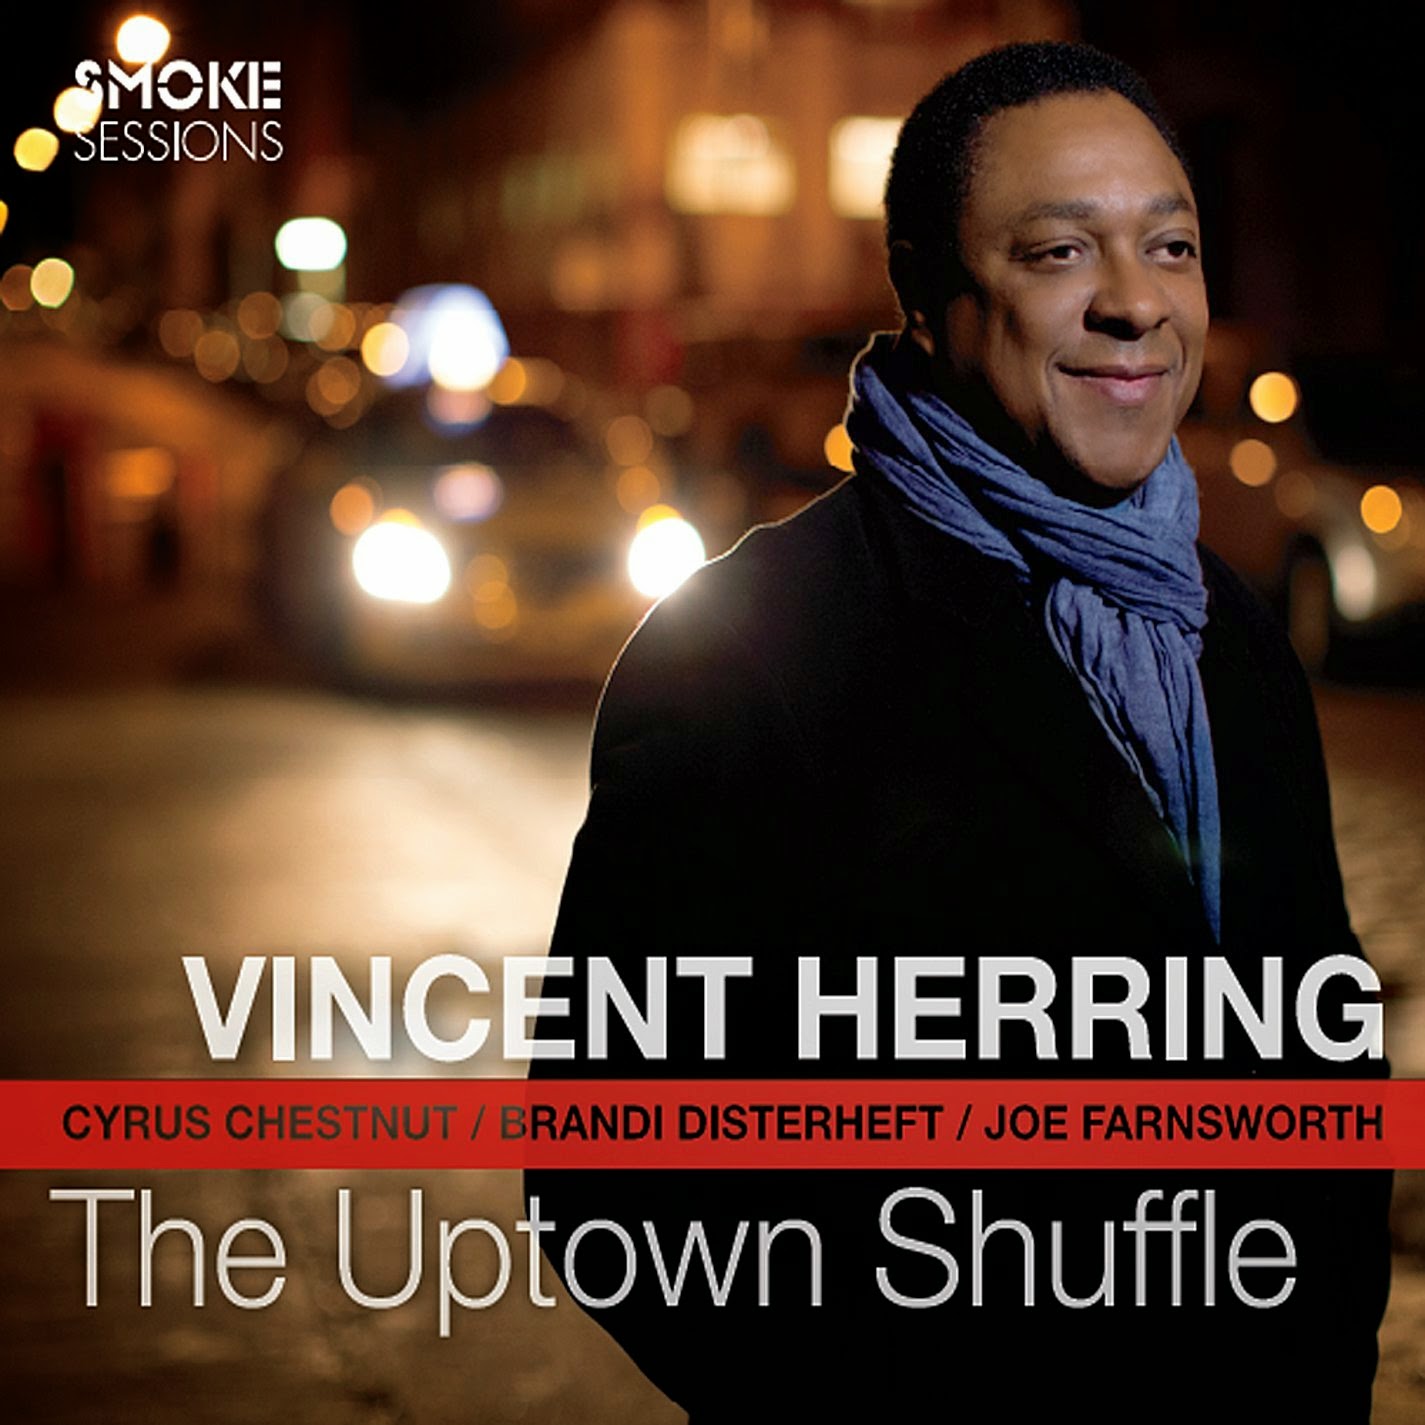 VINCENT HERRING - The Uptown Shuffle cover 